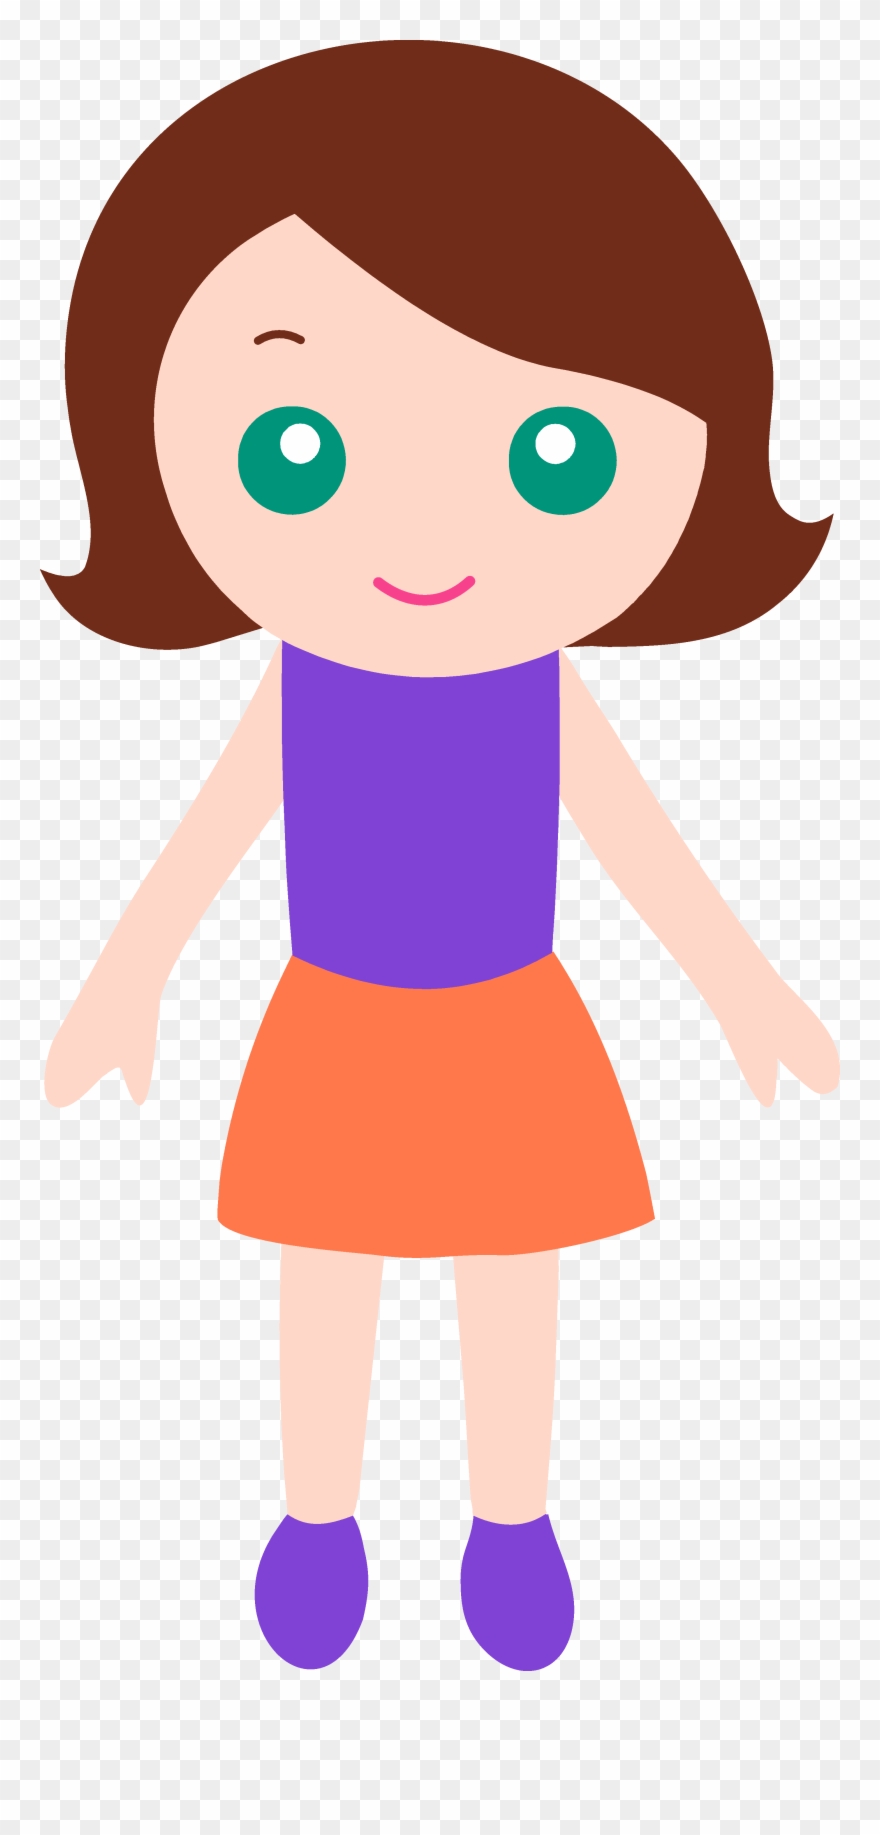 Clipart Of Twins With Brown Hair And Blue Eyes